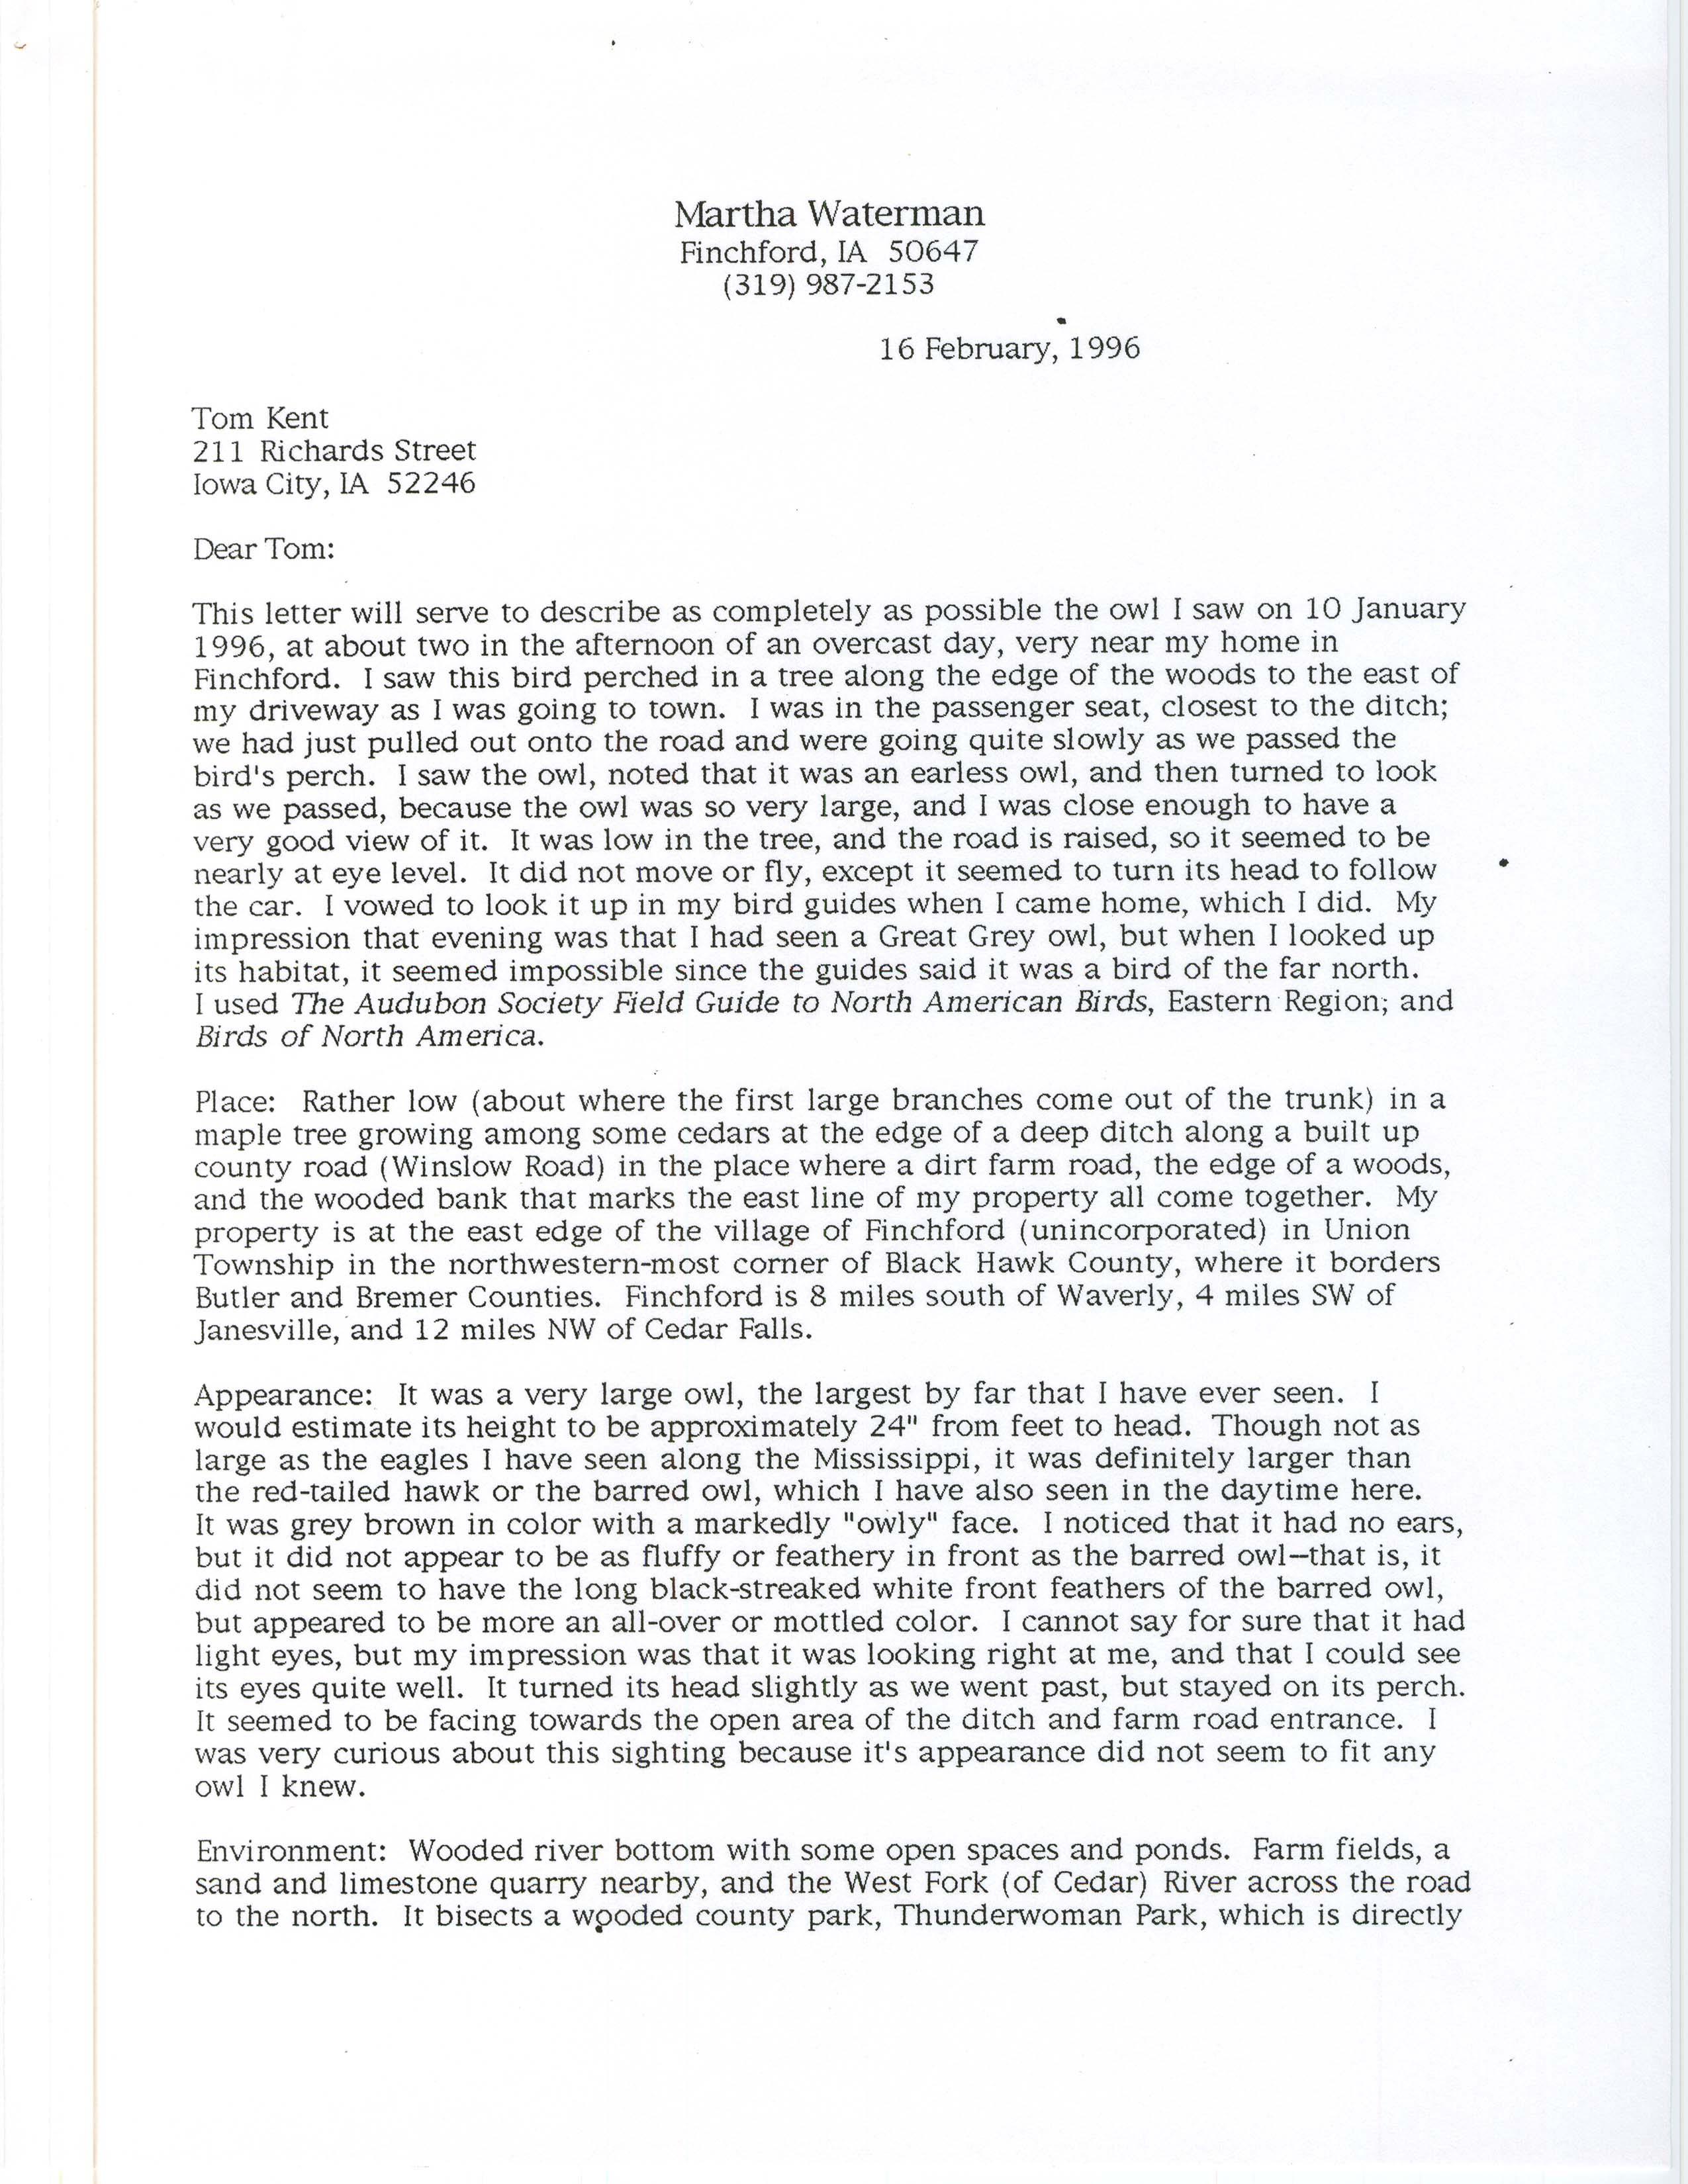 Martha Waterman letter to Thomas H. Kent regarding a possible Great Gray Owl sighting, February 16, 1996